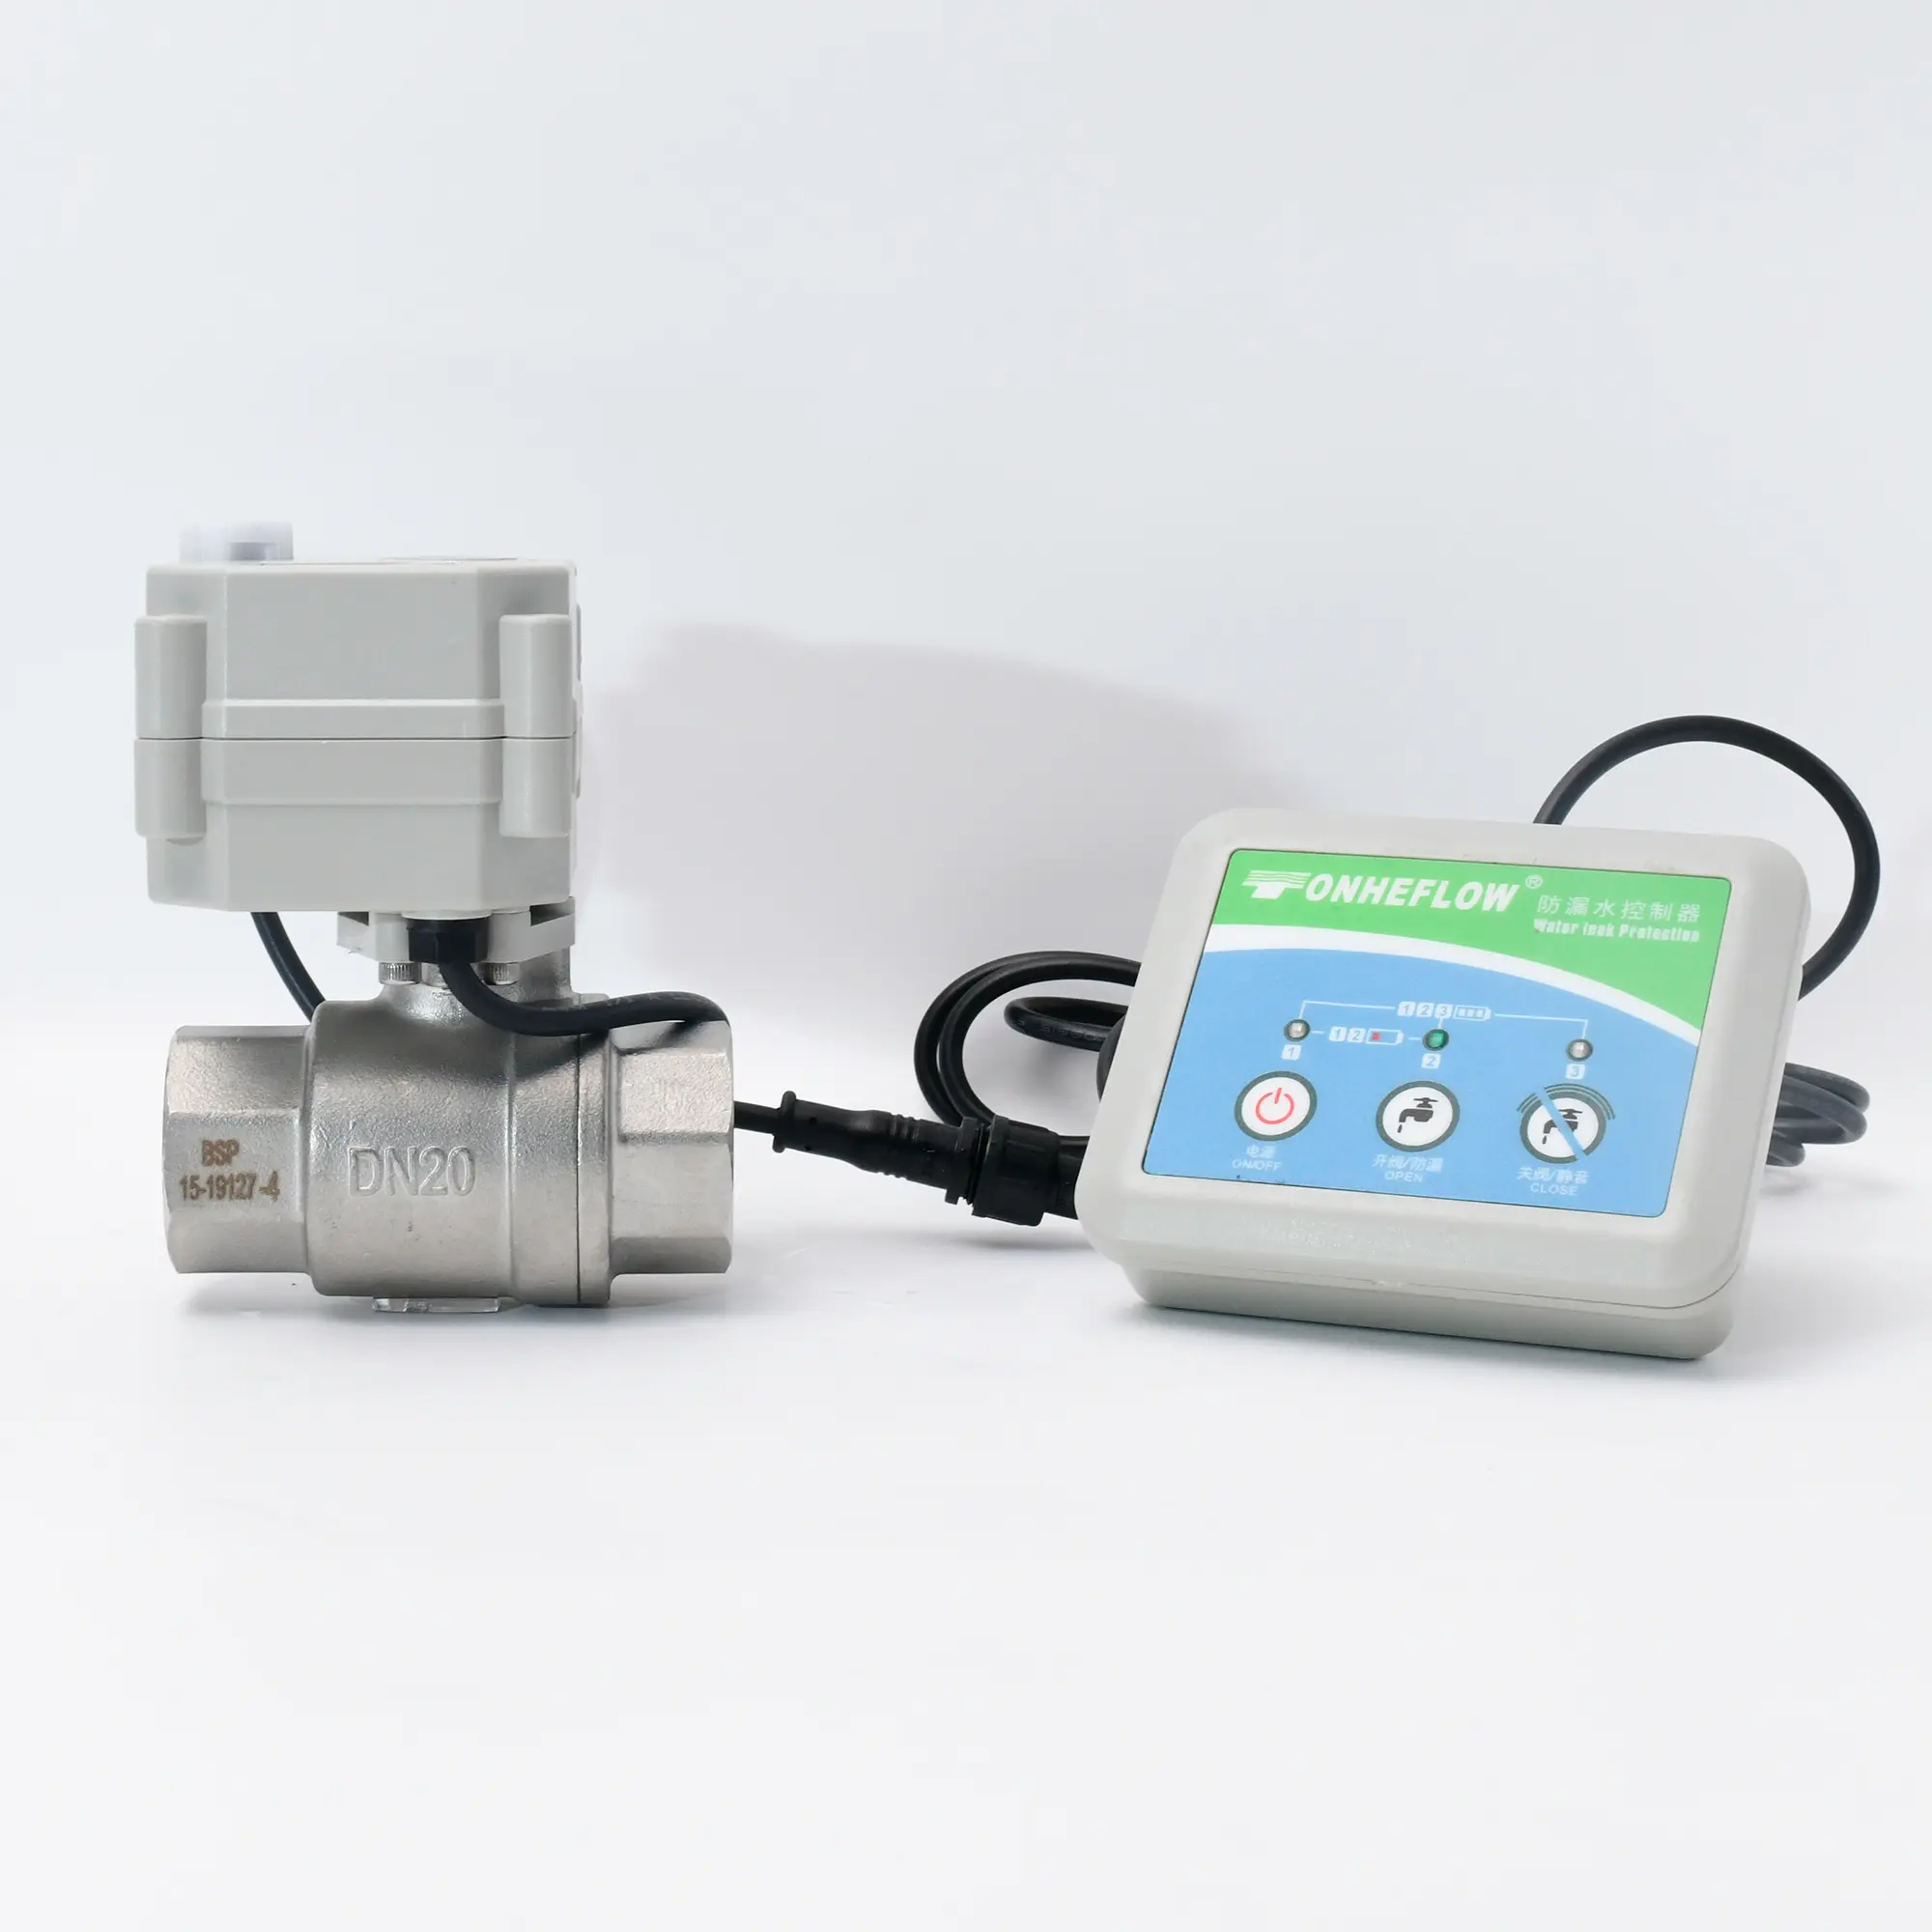 wireless remote water leak control detection system 3/4" inch DN20 stainless steel motorized ball valve with manual operatioon